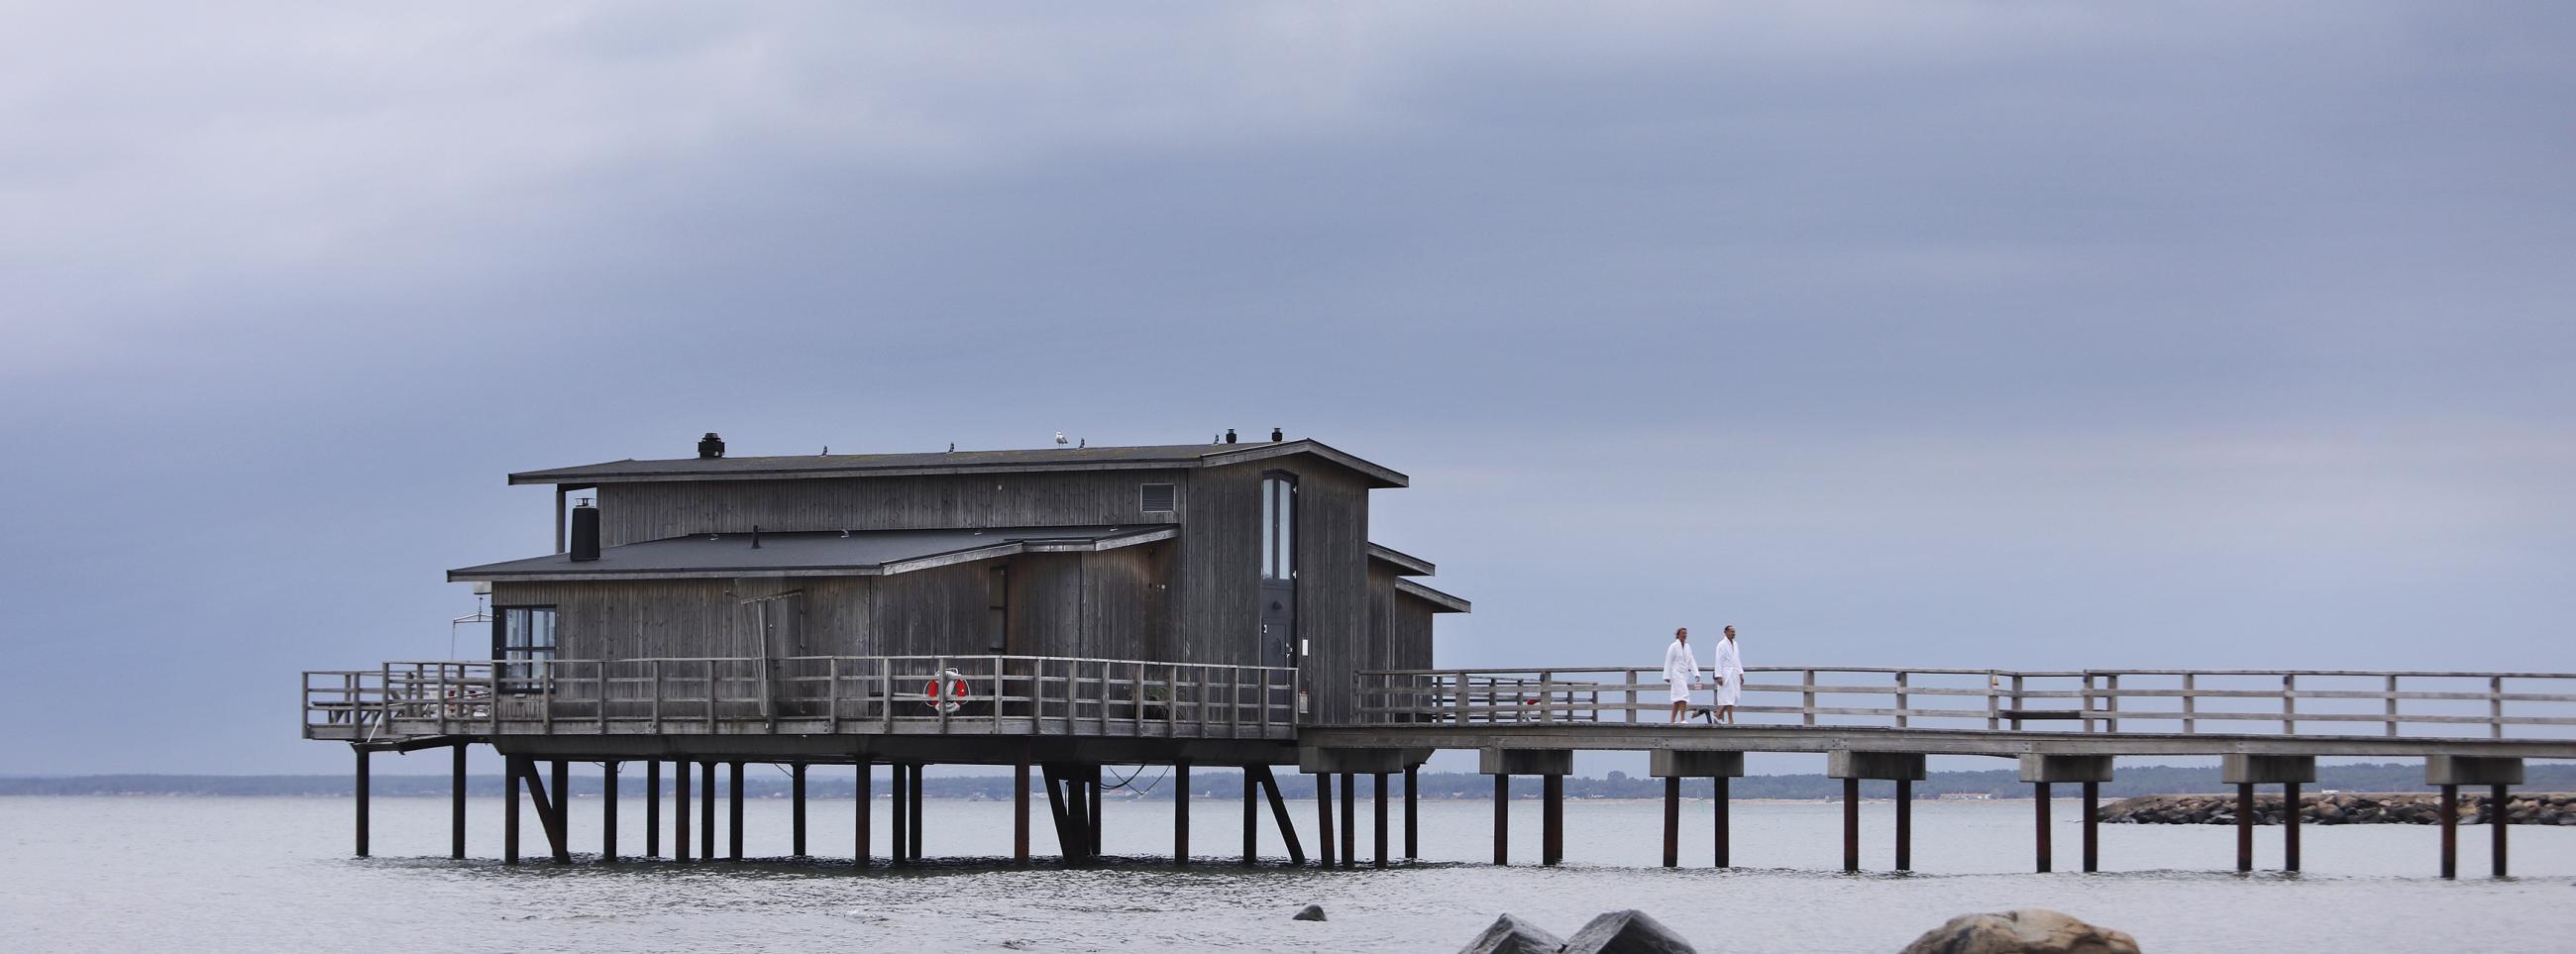 Land view of open-air bathhouse held up by pier stilts in the sea